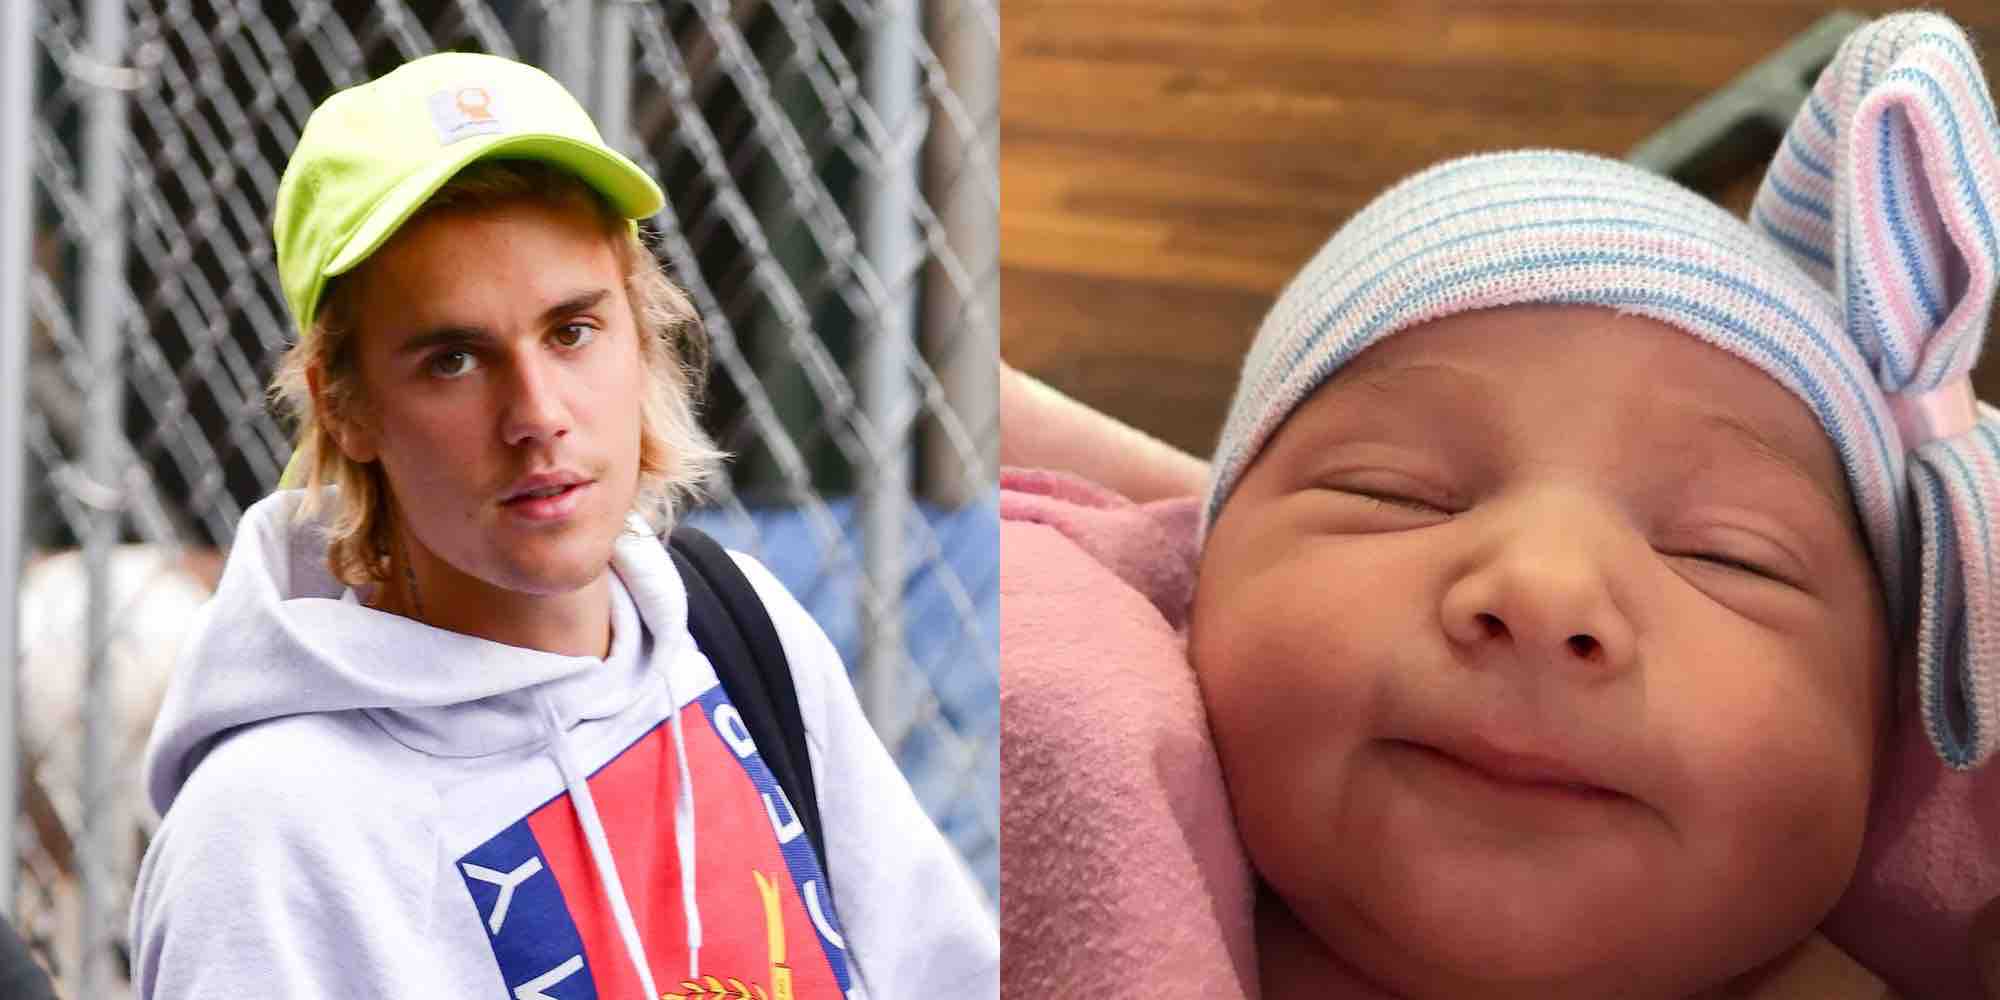 Justin Bieber Introduces the World to His New Baby Sister (Photo)